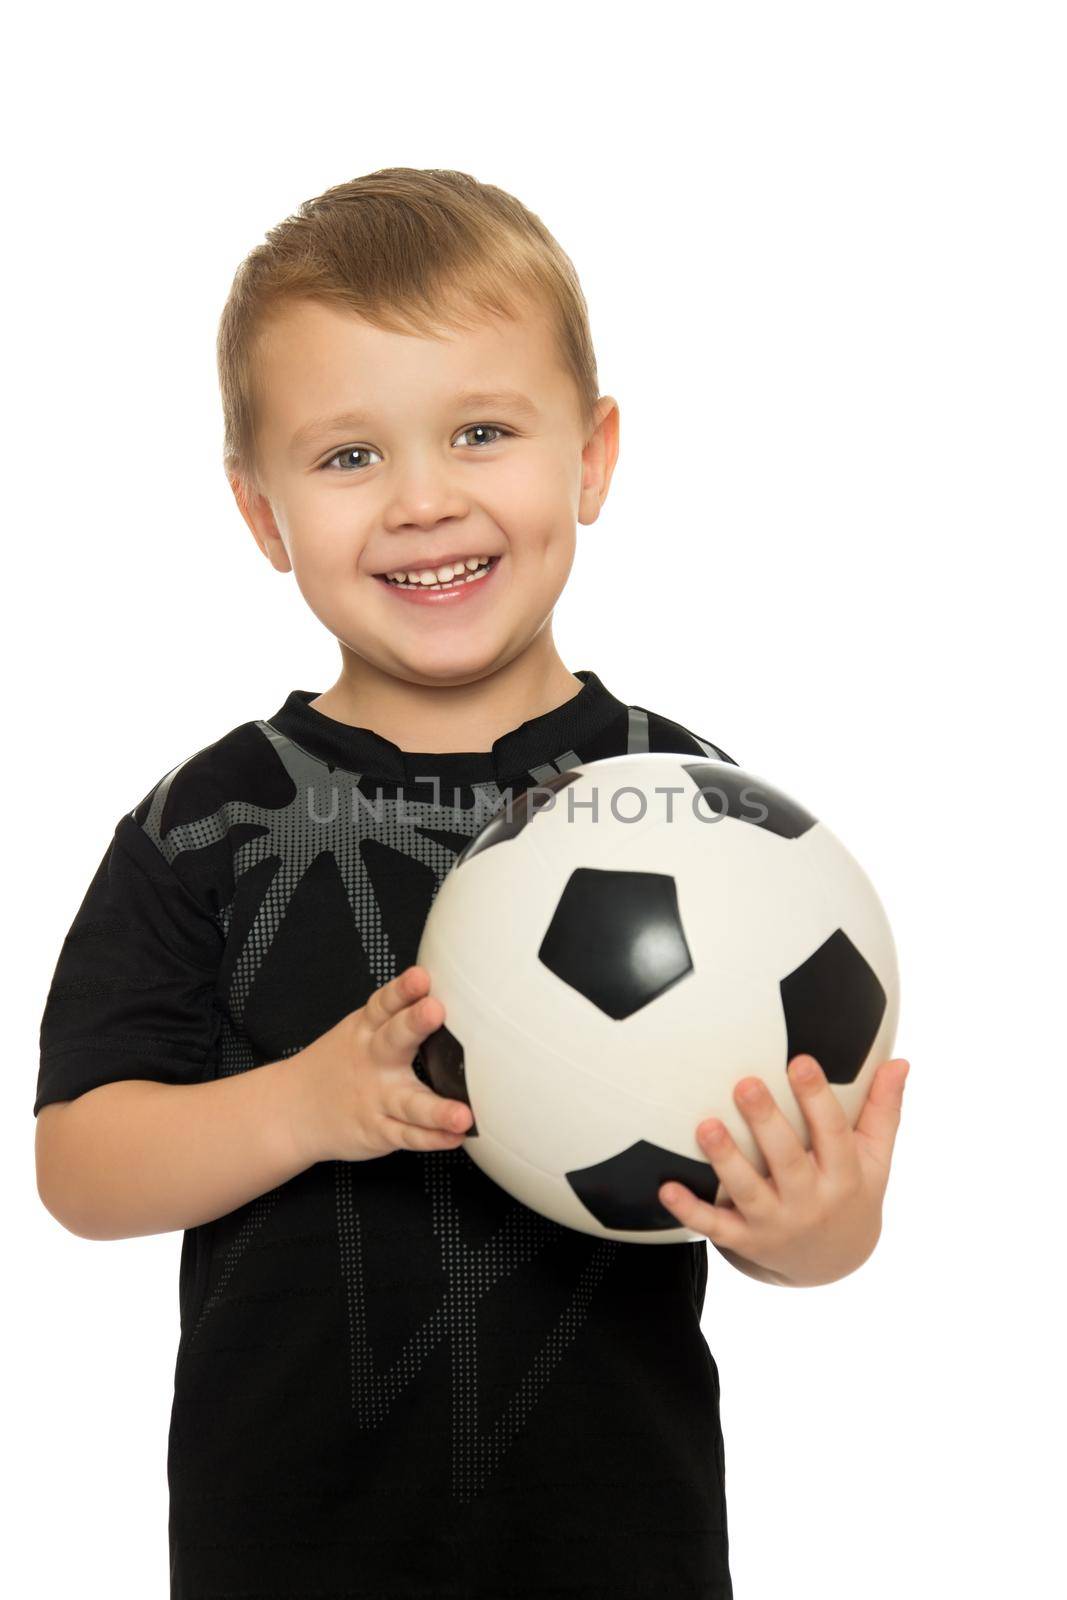 Portrait of a cheerful little boy football player in black uniform. The boy holds a hand soccer ball.Close-up - Isolated on white background